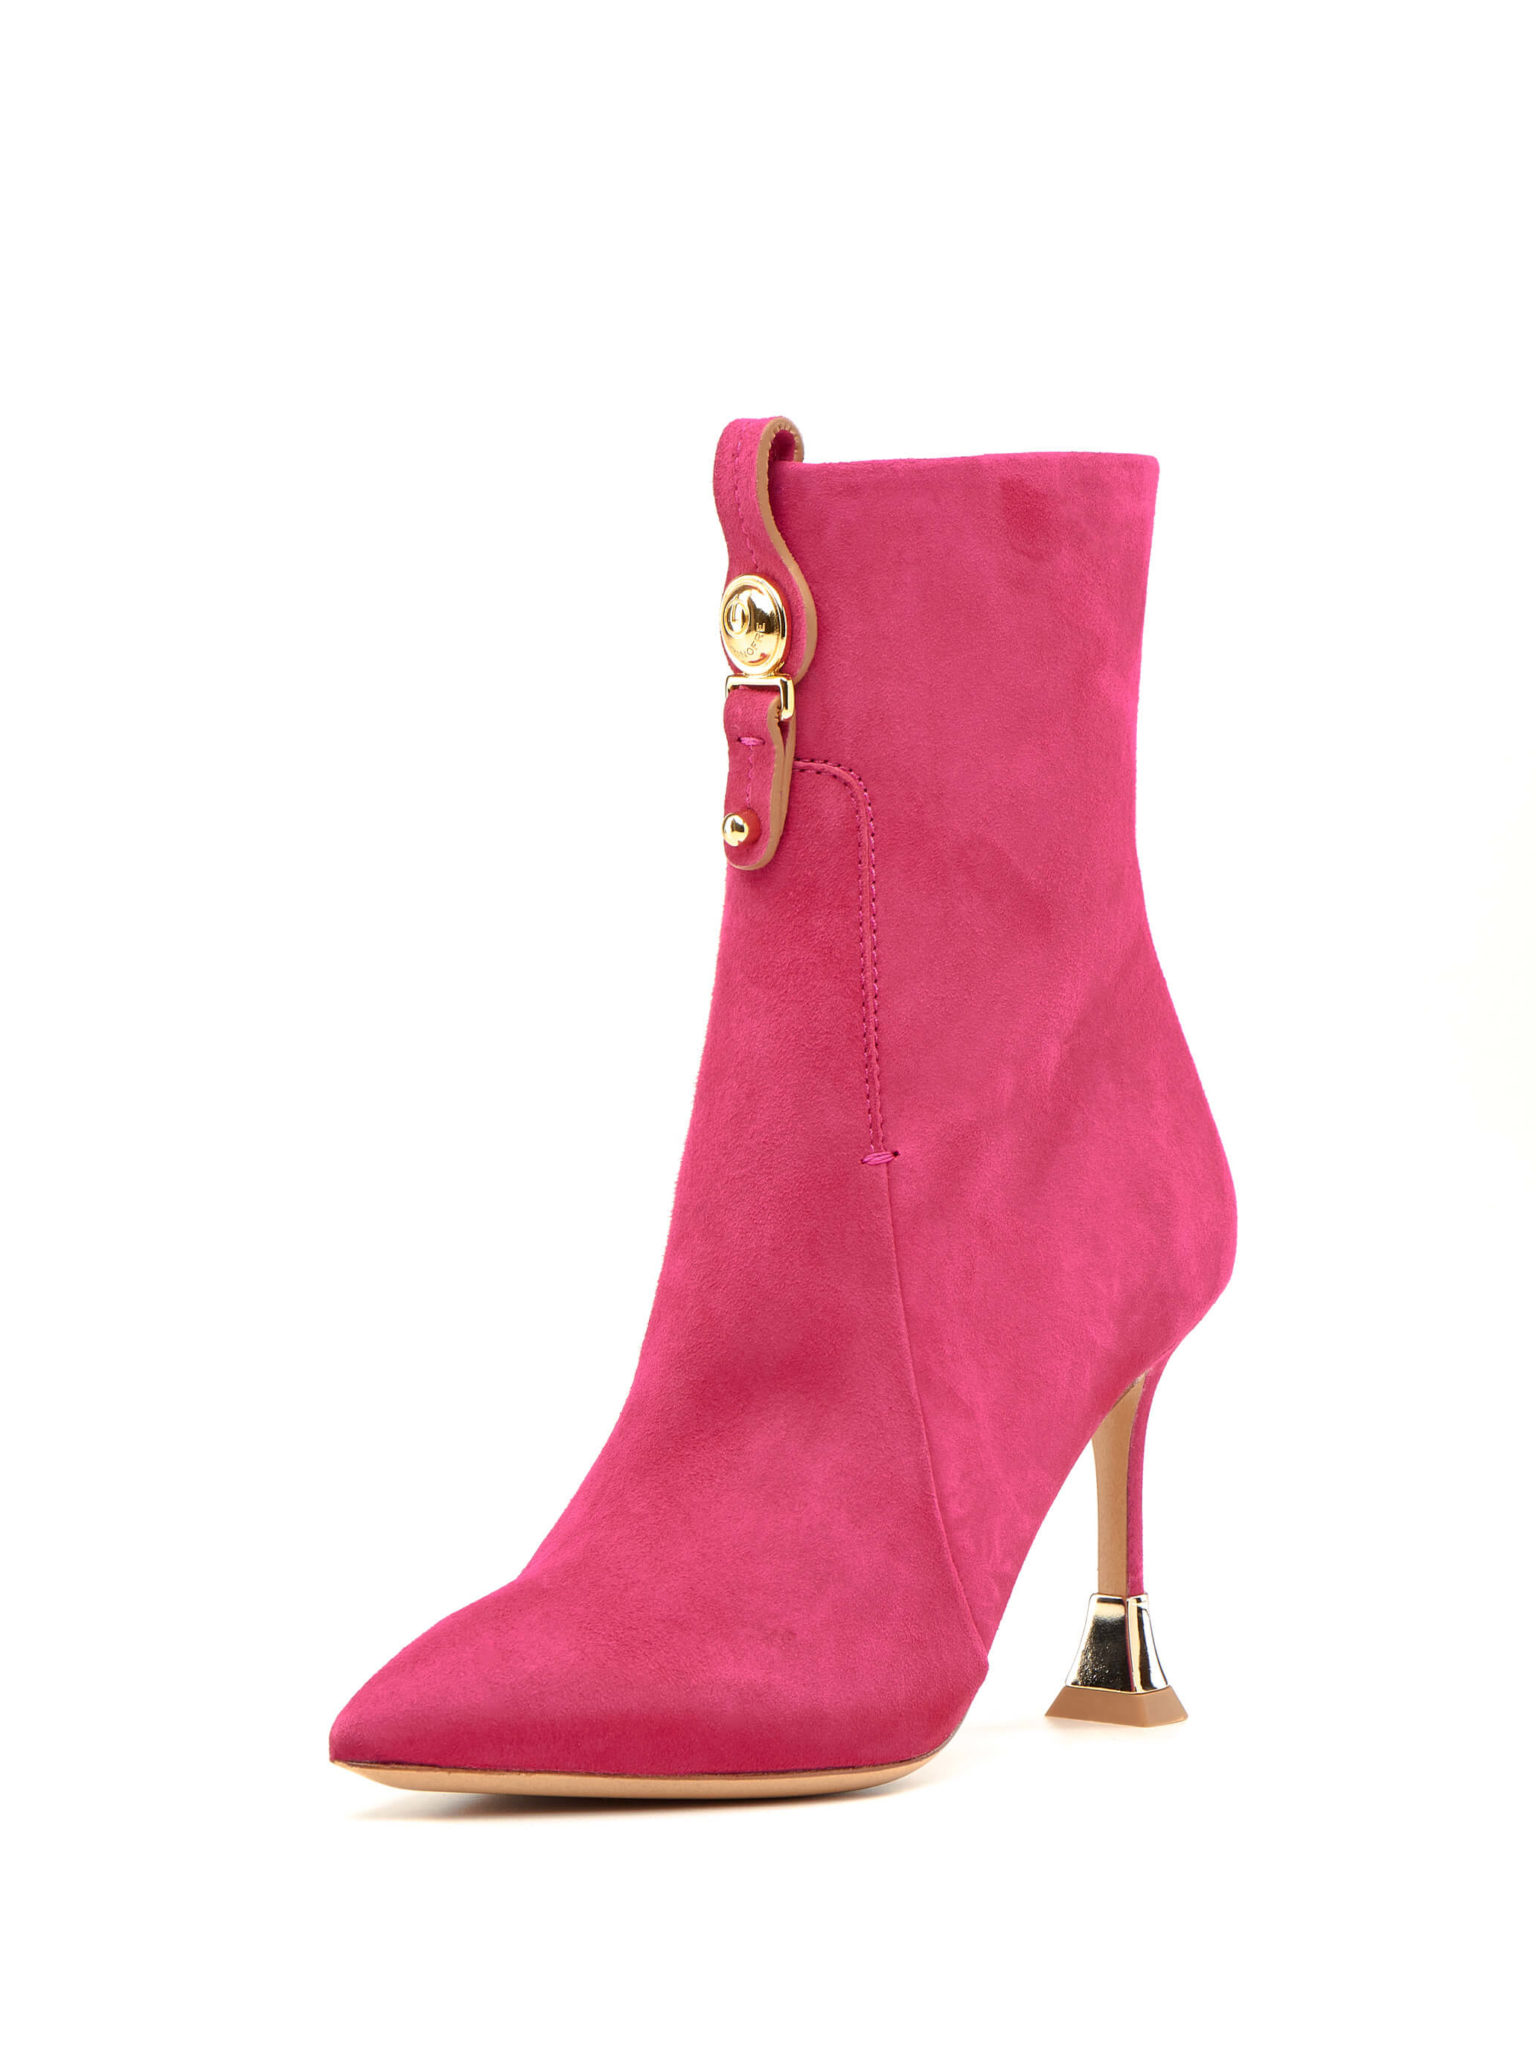 Pink suede stiletto ankle boots- Fall Winter 22